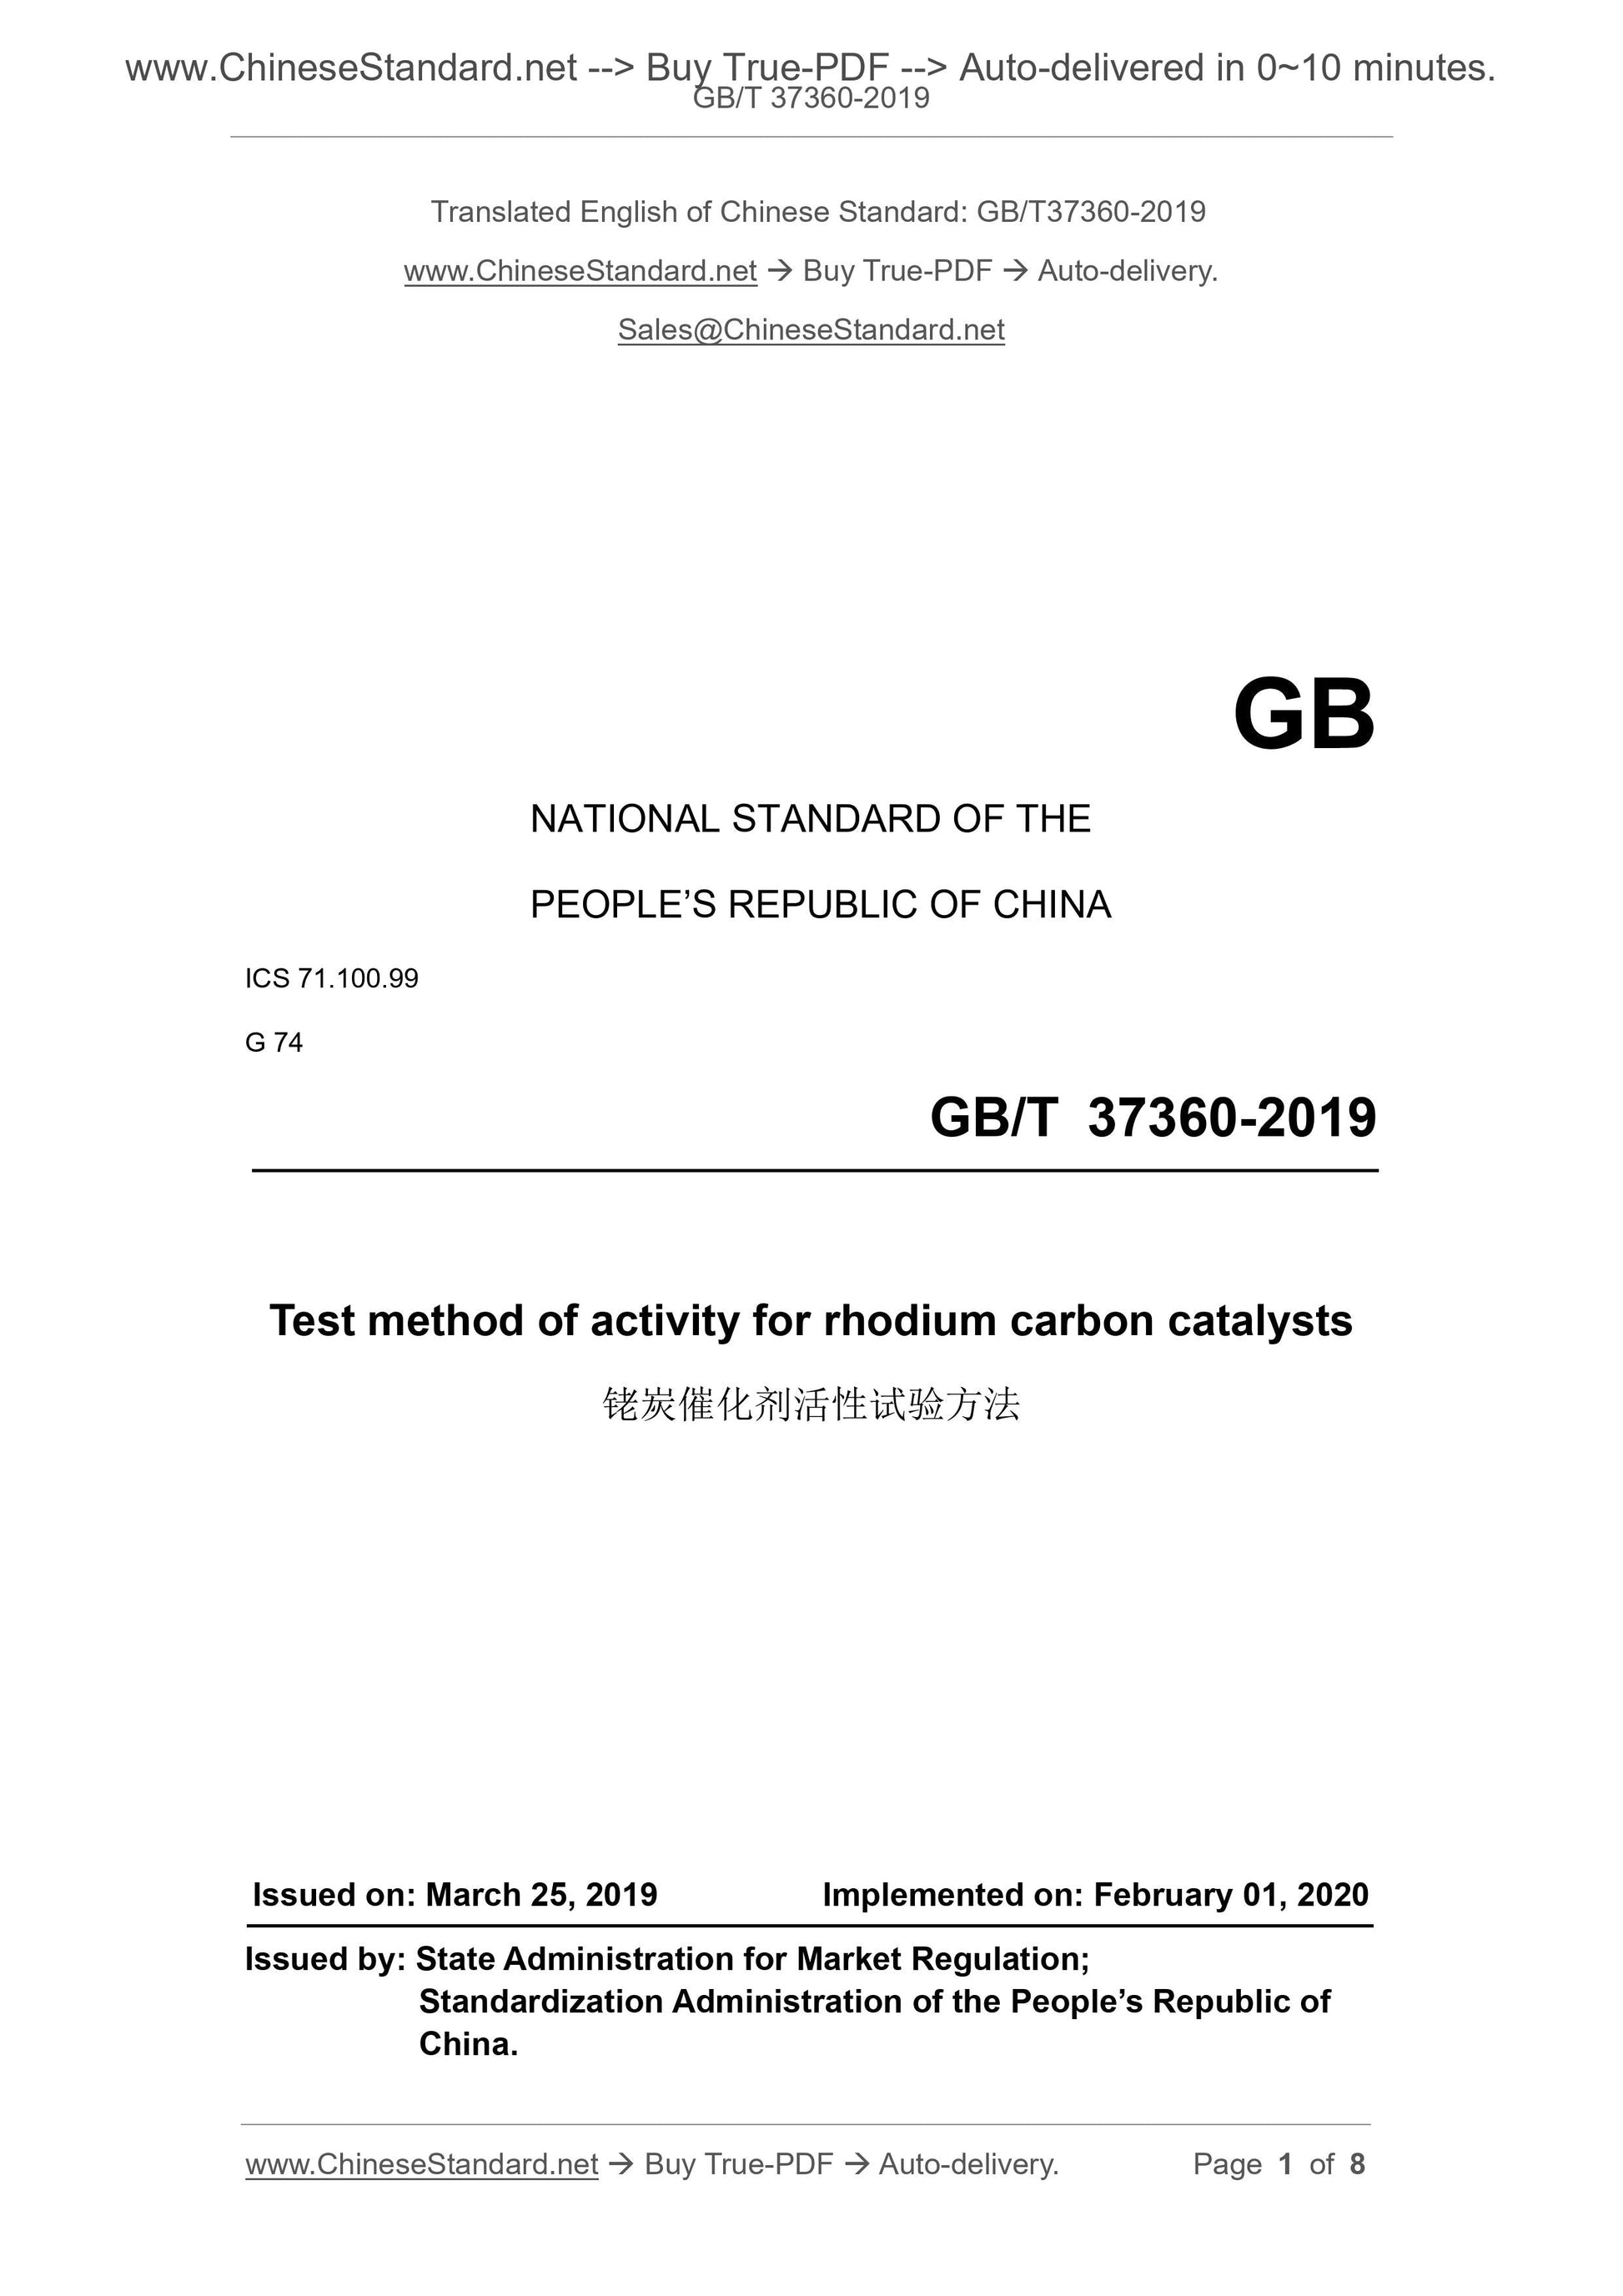 GB/T 37360-2019 Page 1